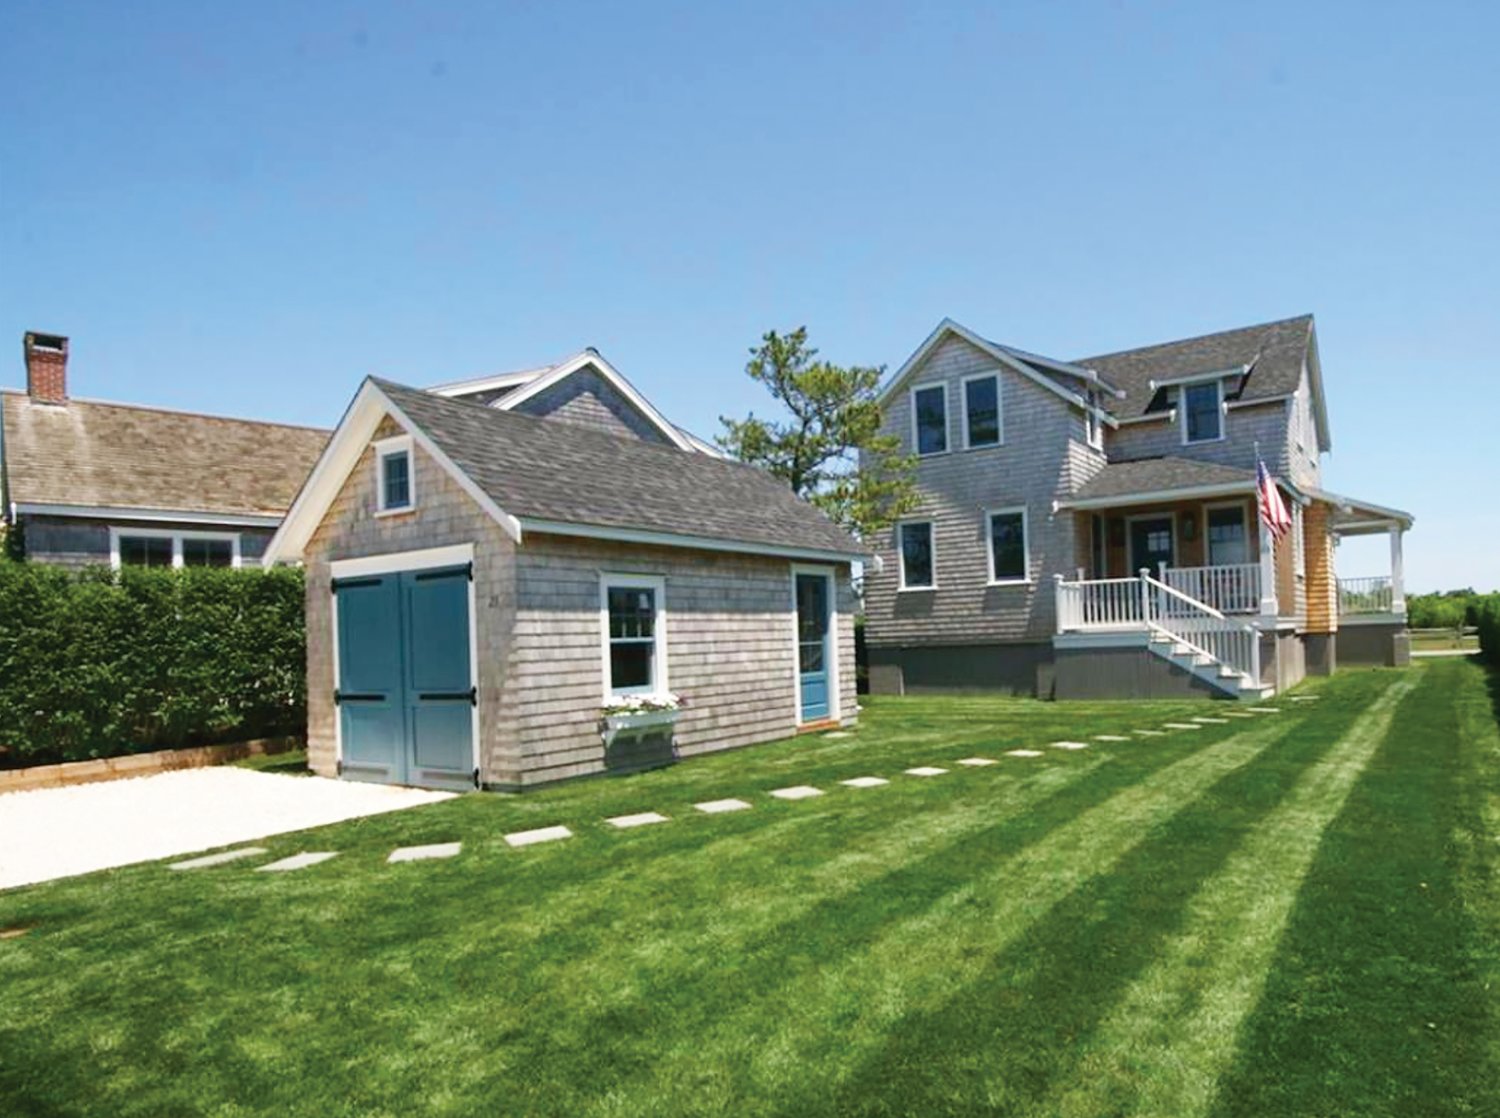 Located in the heart of Brant Point, this four-bedroom, four-and-a-half bathroom home sits on just over a tenth of an acre with a large yard and a garage.